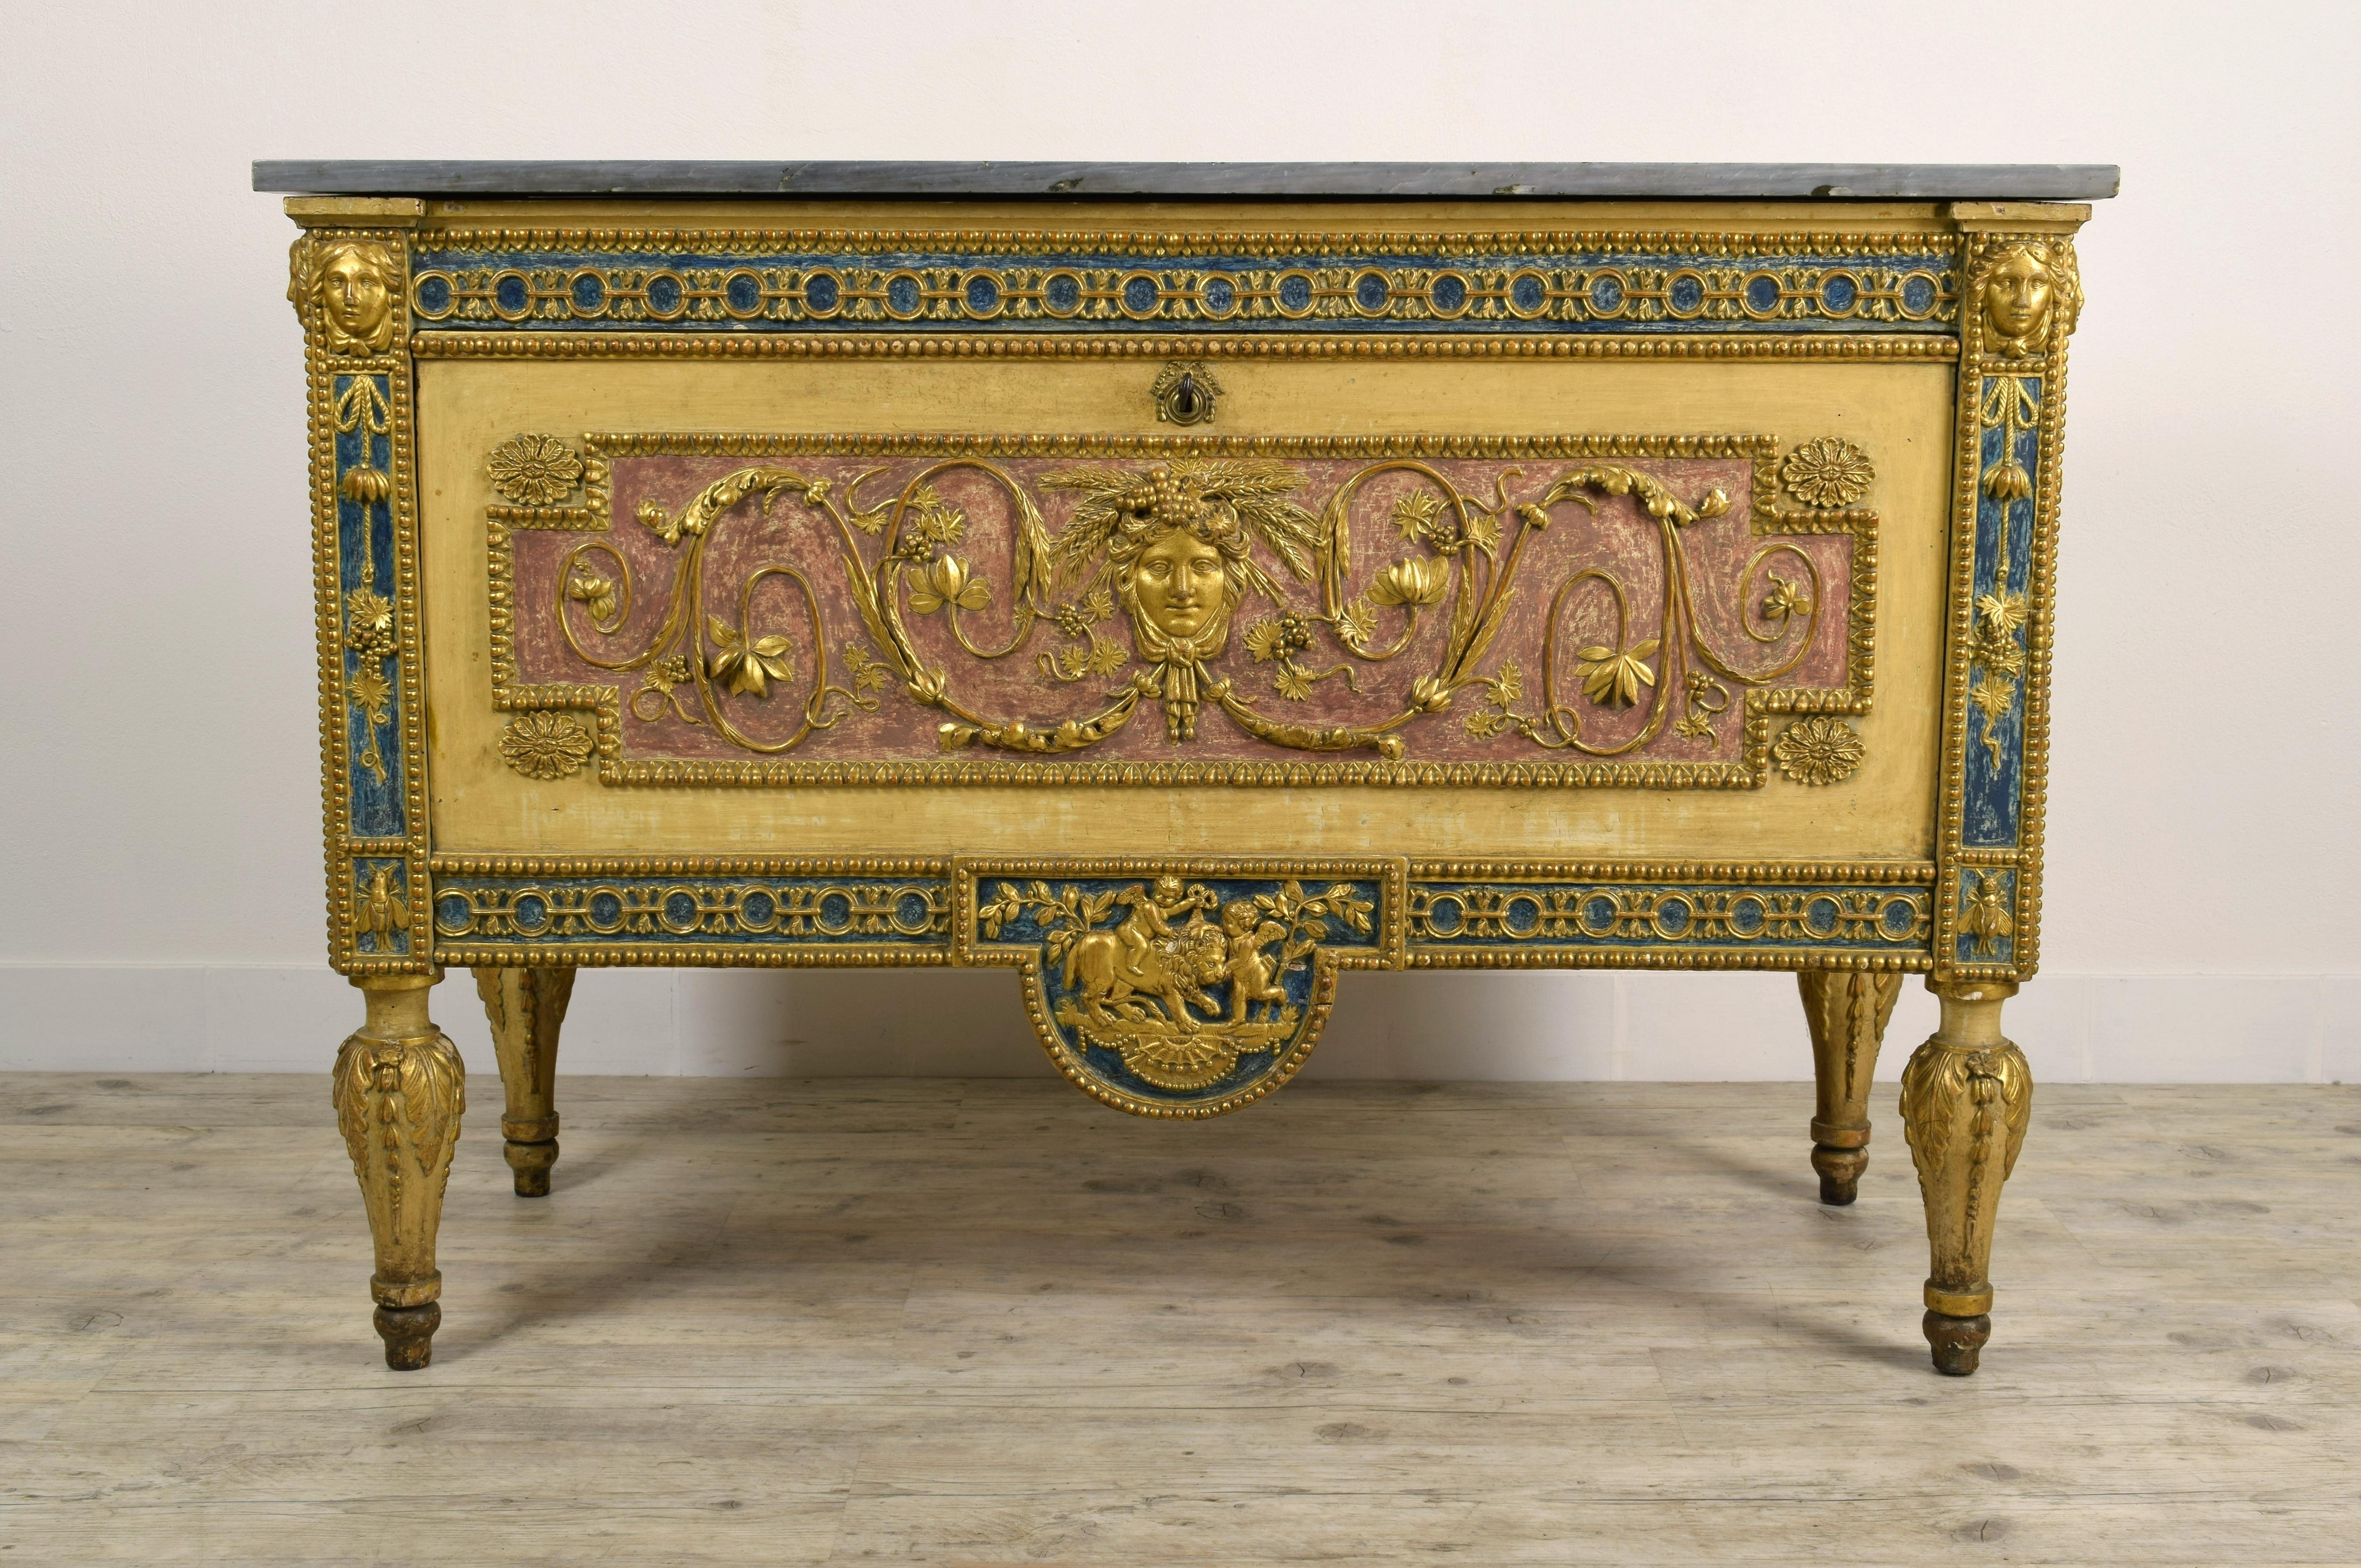 18th century Italian neoclassical carved, lacquered and gilded wood dresser attributed to Francesco Bolgiè (1752?-1834).

The fine and elegant commode is made of finely carved, lacquered and gilded wood. It presents several stylistic and material